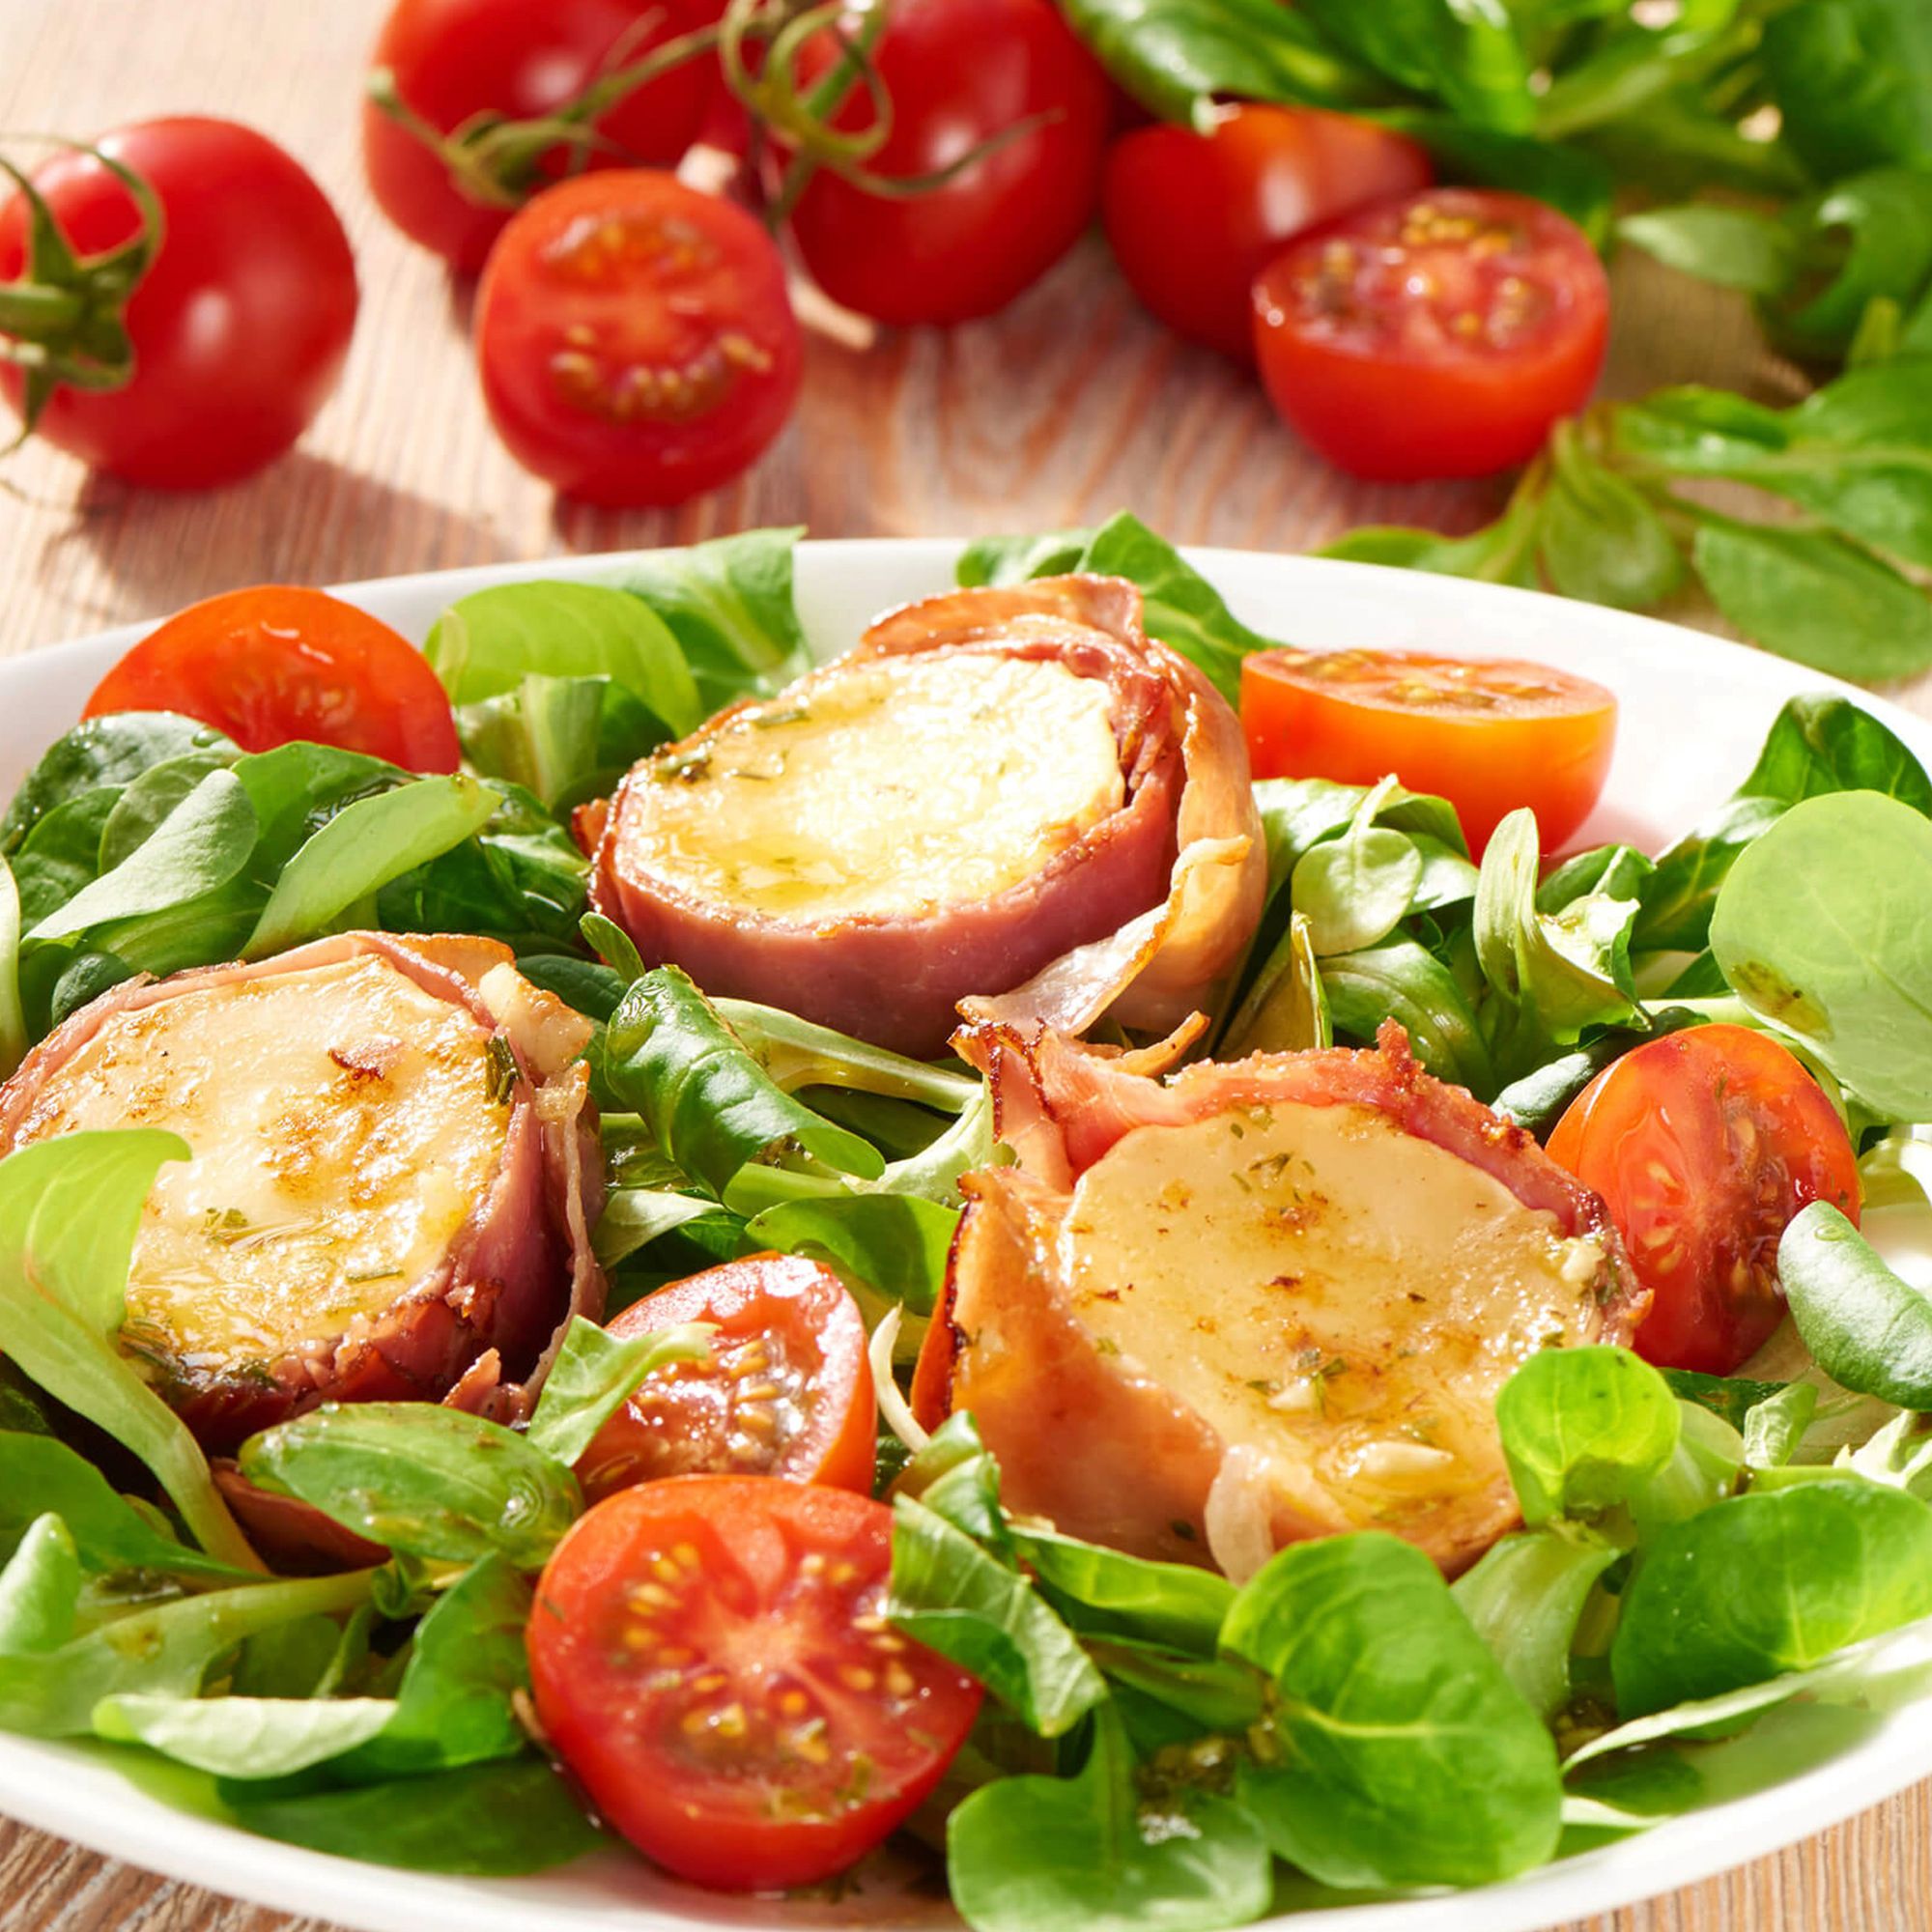 Tomato and Lettuce Salad with Mayo